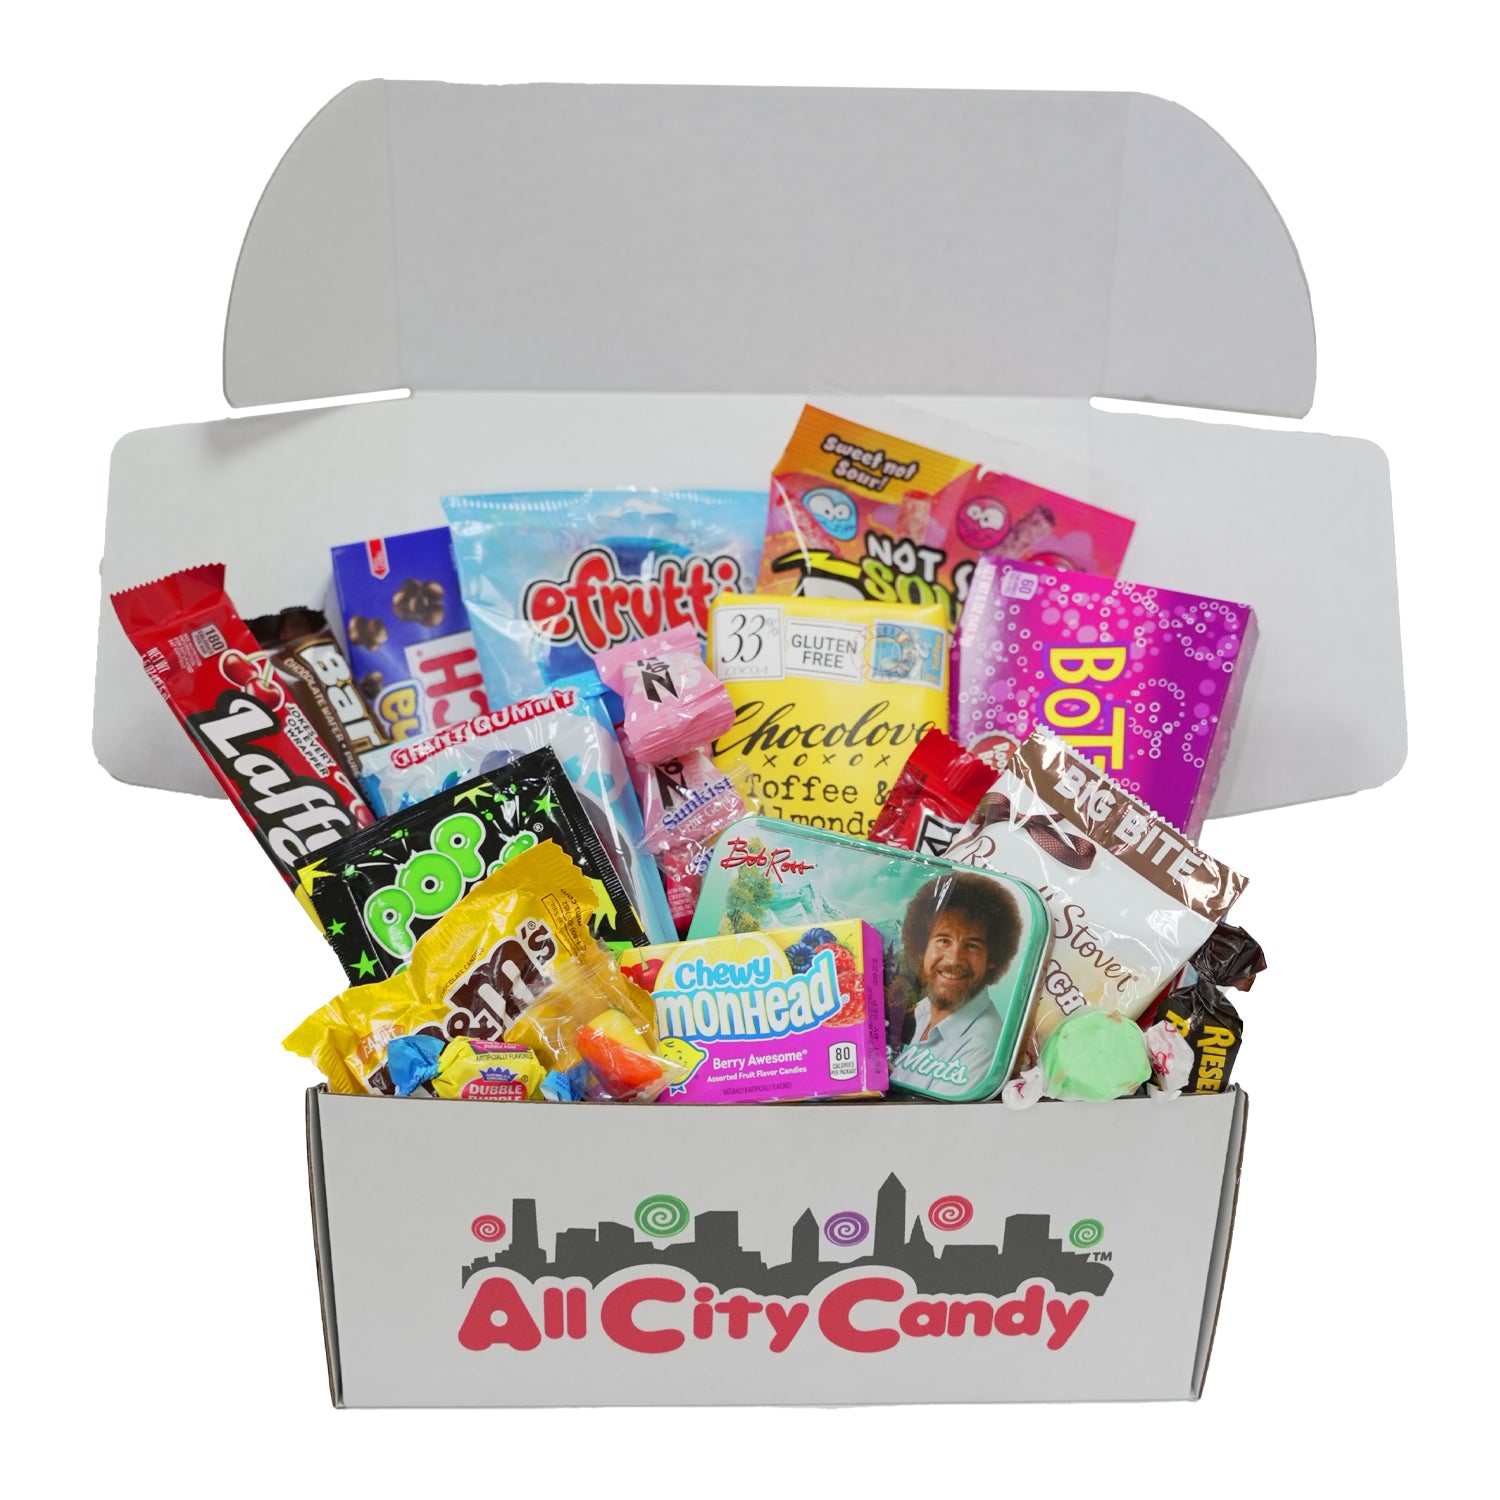 All City Candy's I ❤️ Candy A Bunch Assortment Box